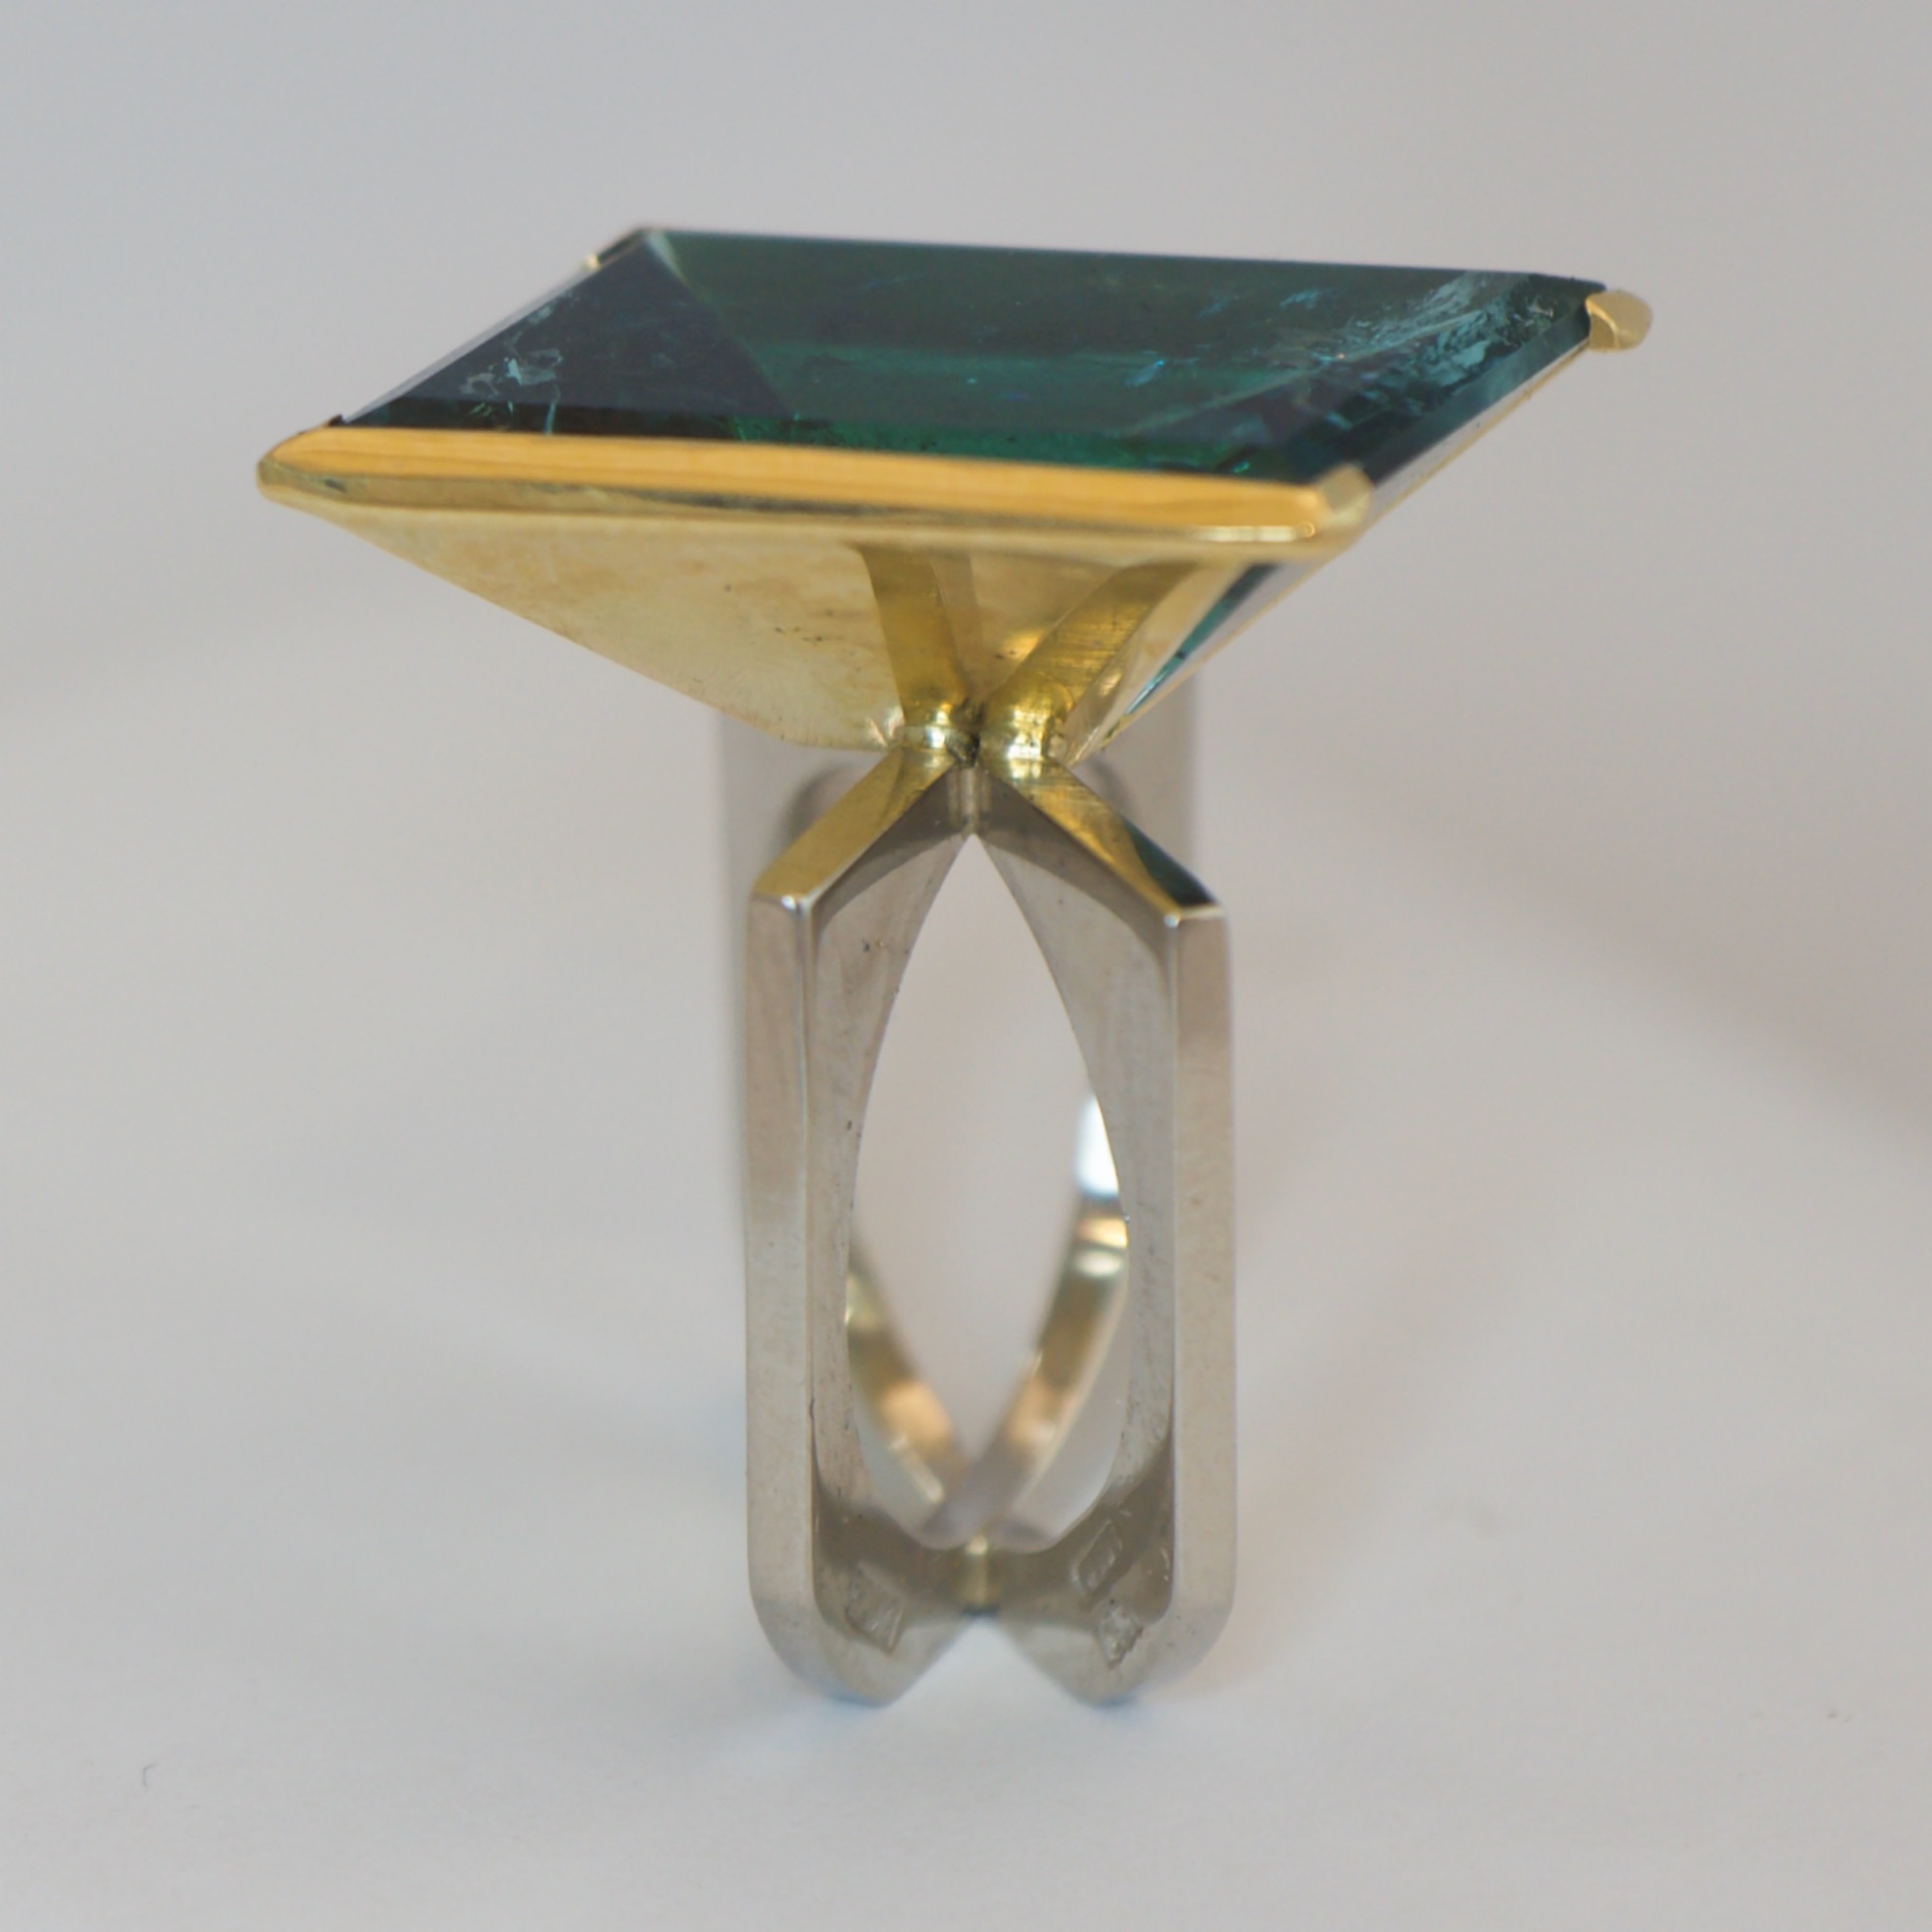 Louis Vuitton 18ct yellow golden ring with blue tourmaline